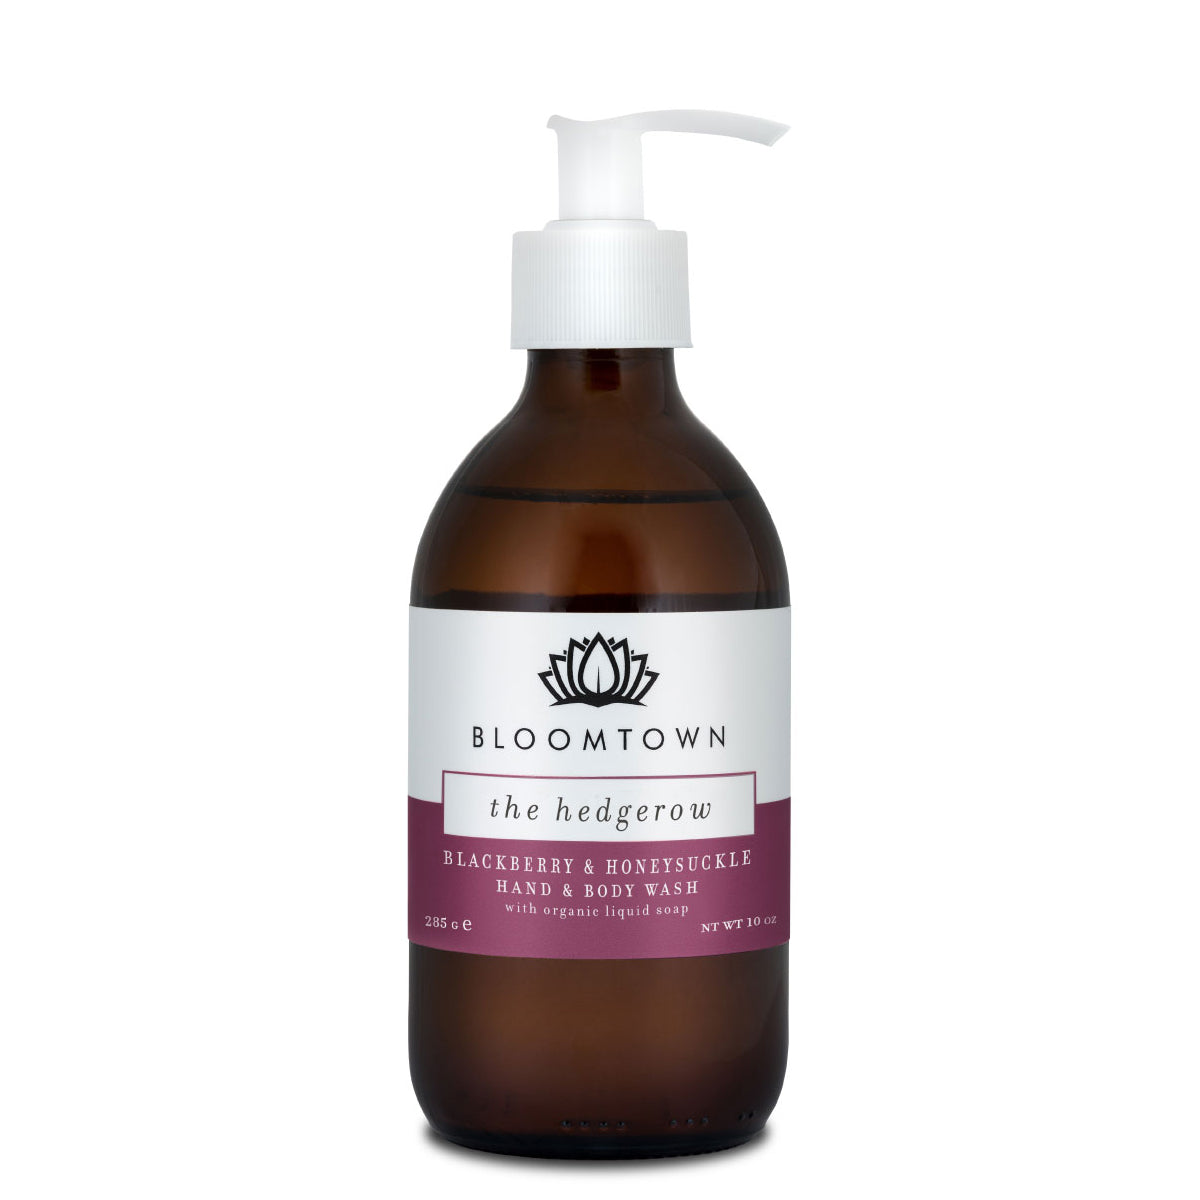 Bloomtown Organic Hand & Body Wash The Hedgerow | Vegan Skincare | Sustainable Beauty | Cruelty Free | Natural Ingredients | Palm Oil Free